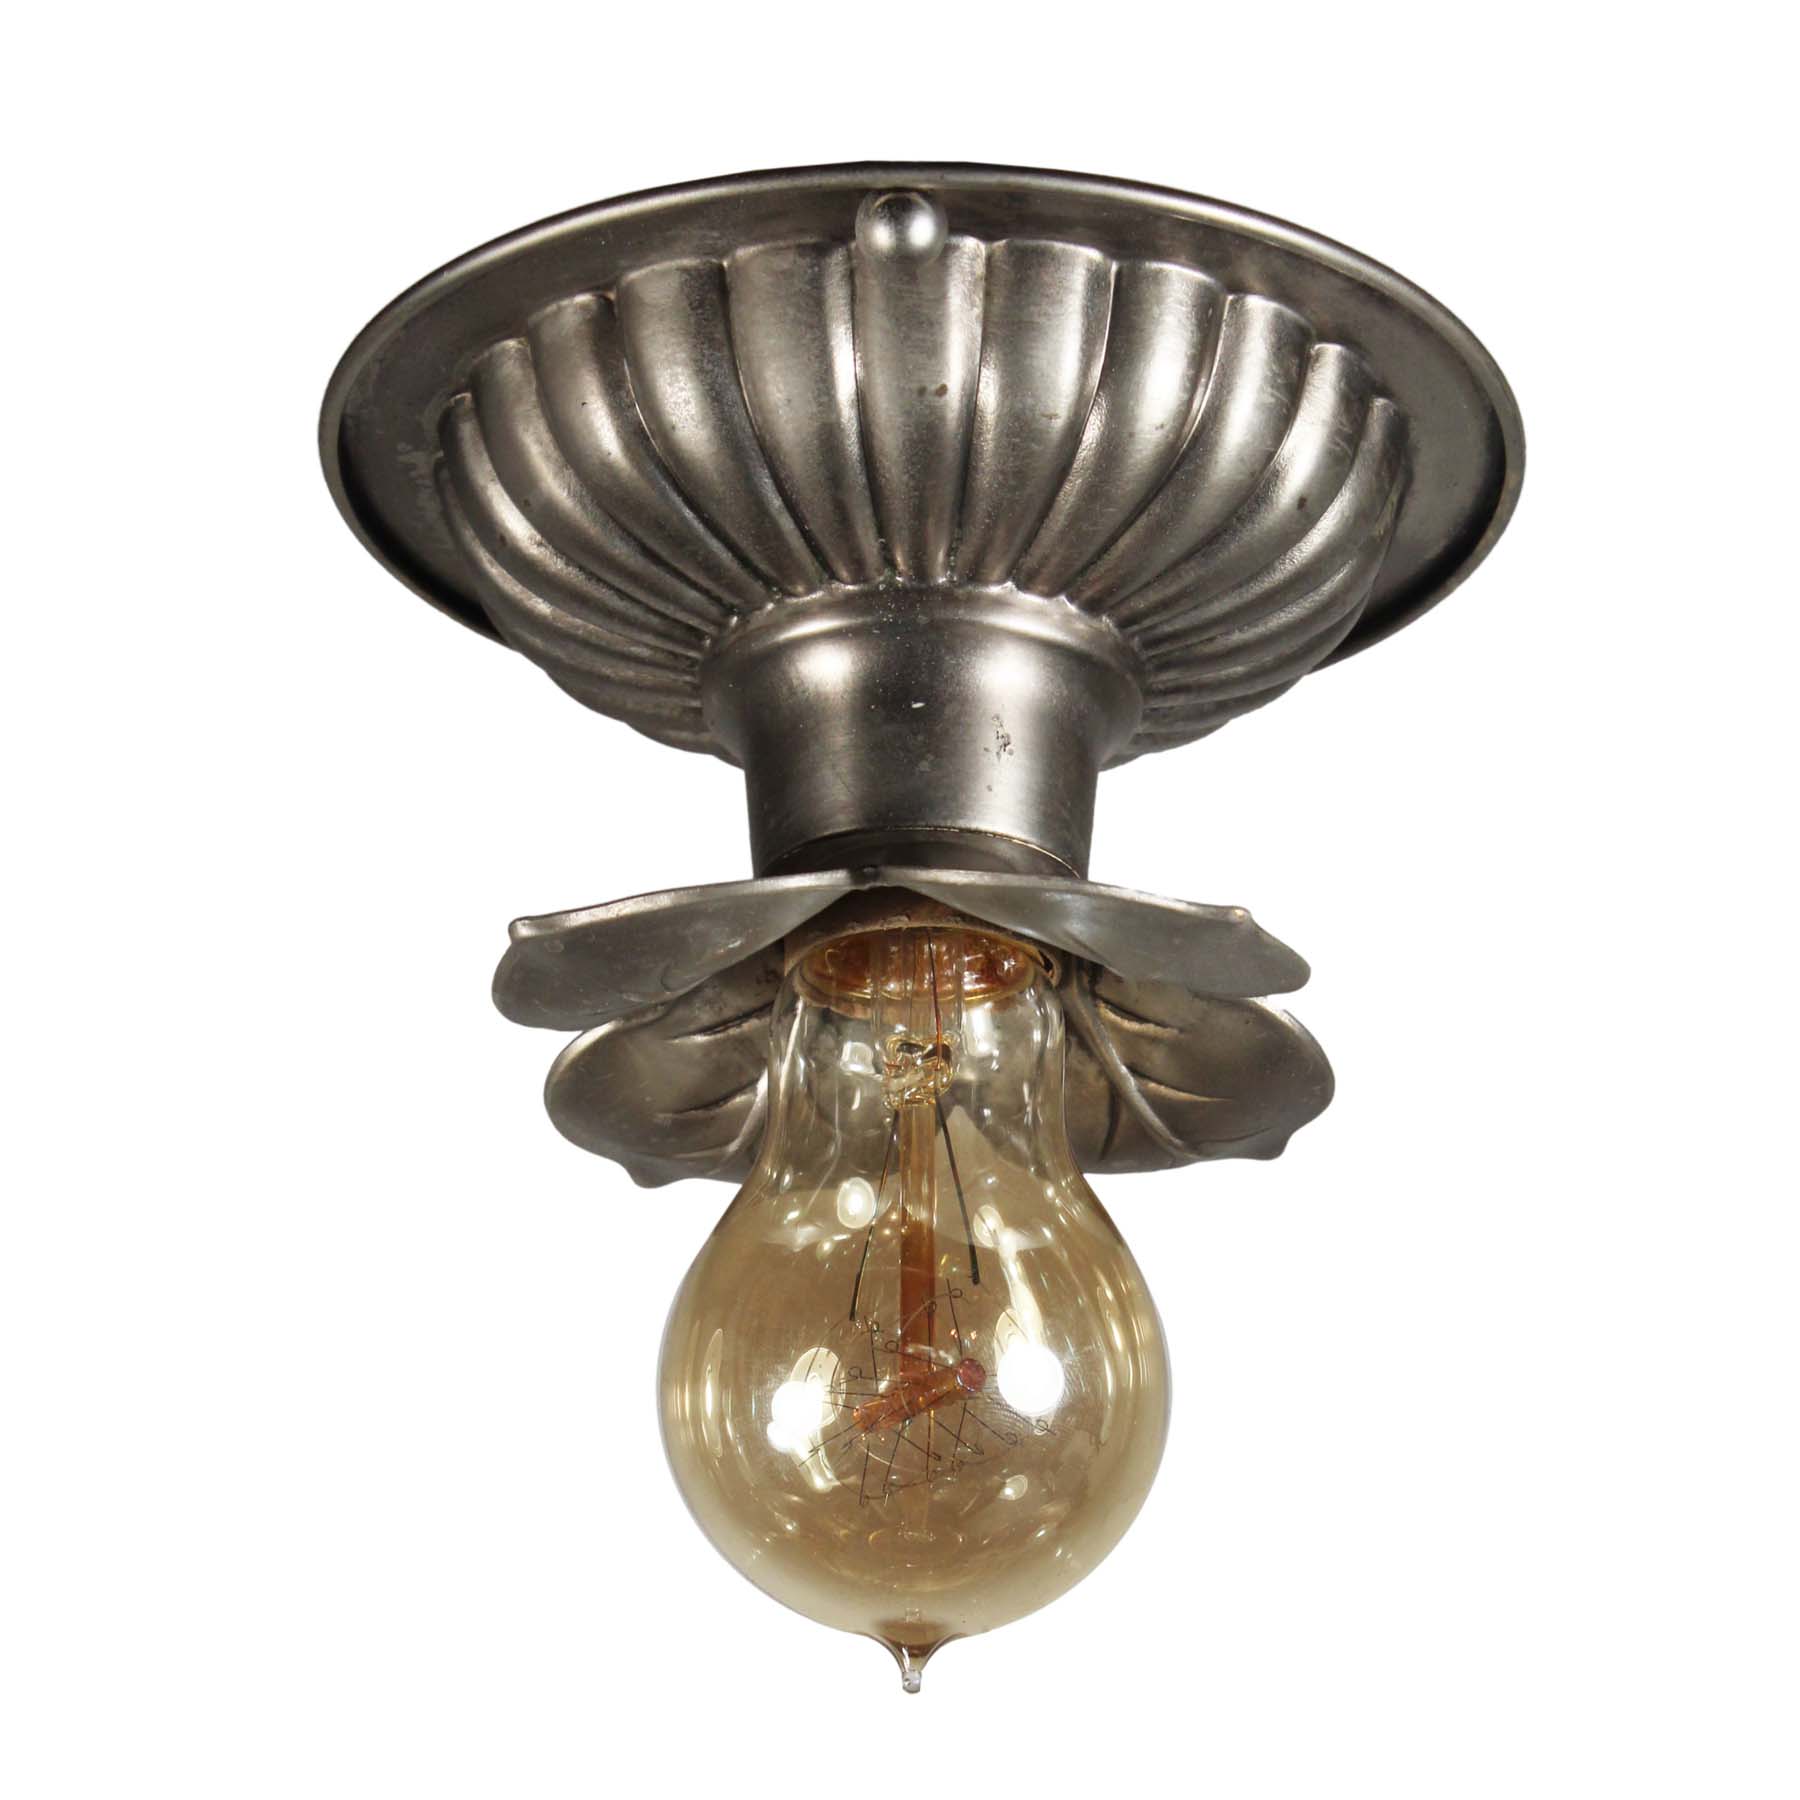 SOLD Antique Flush-Mount Lights with Exposed Bulbs-69486